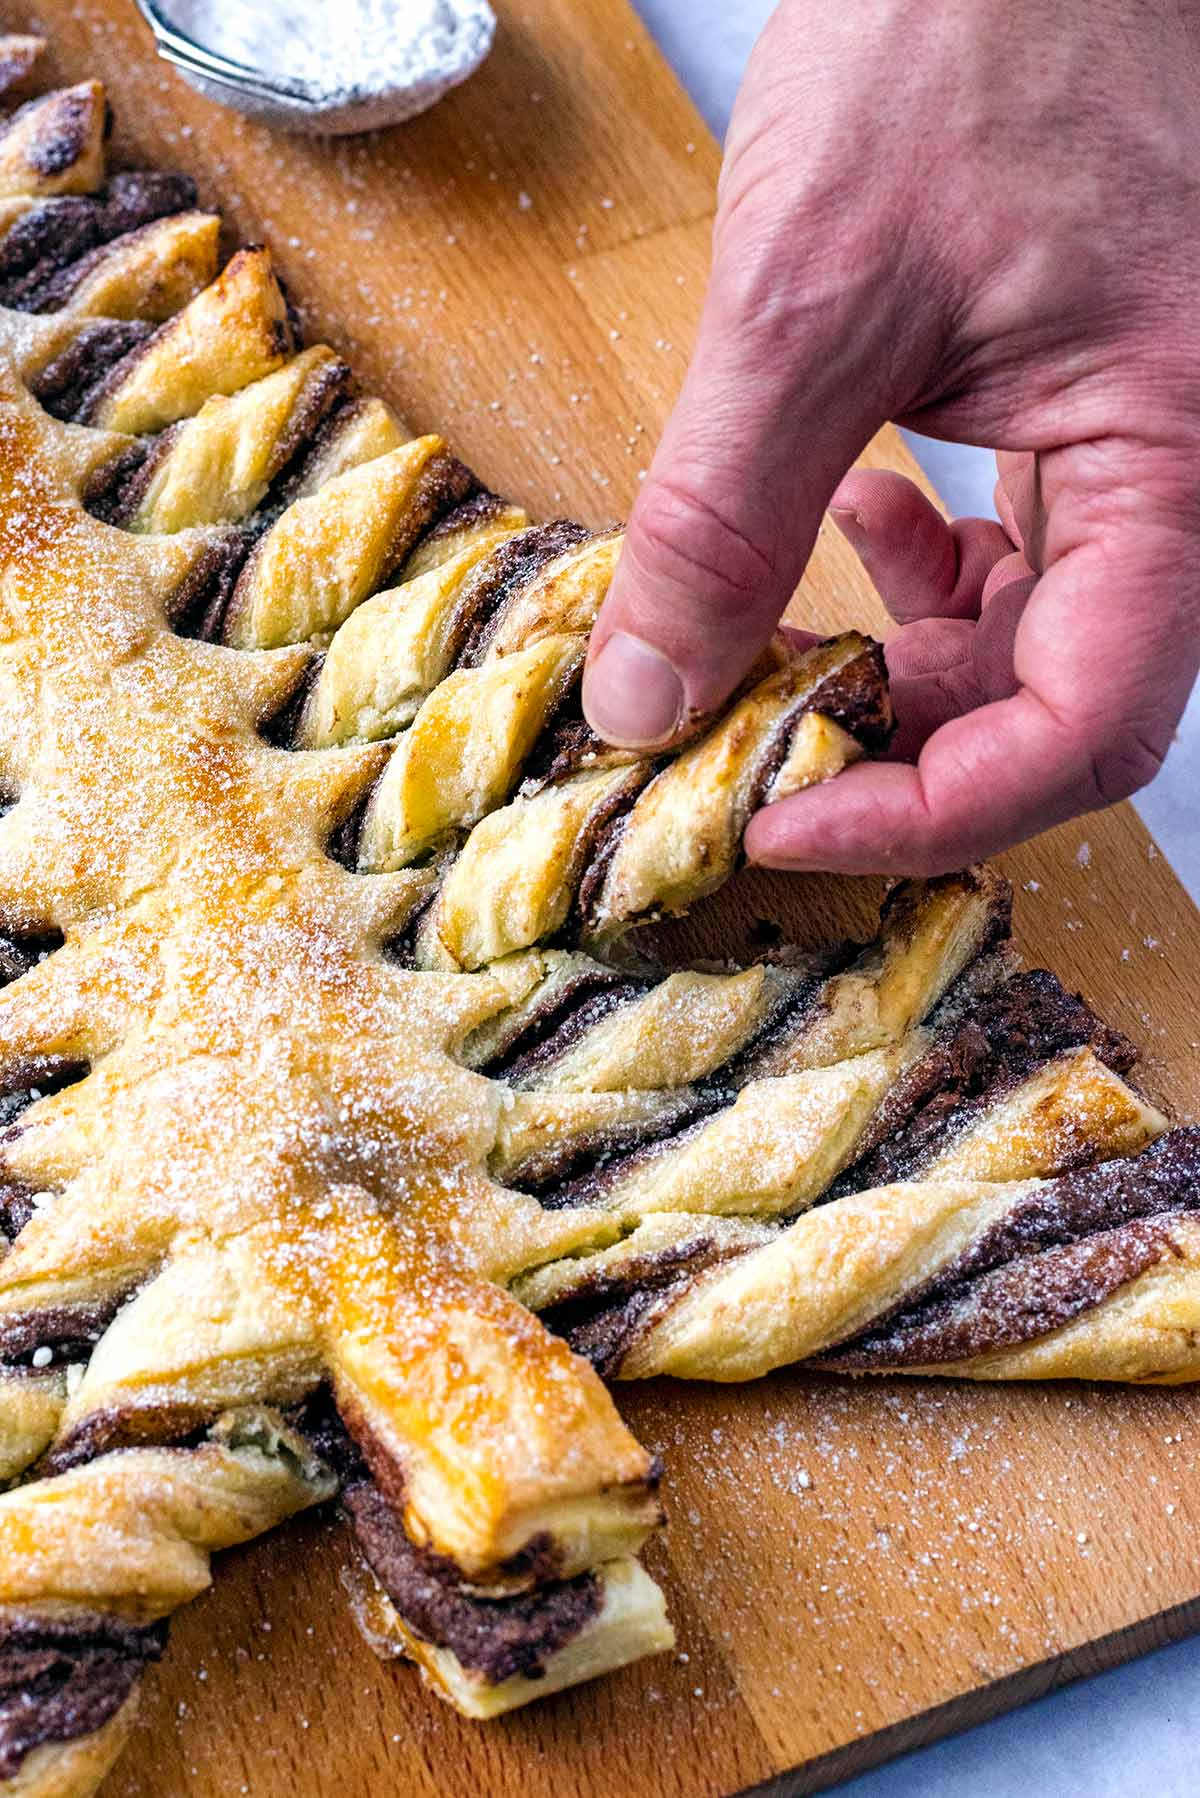 A hand pulling a branch from a pastry Christmas tree.